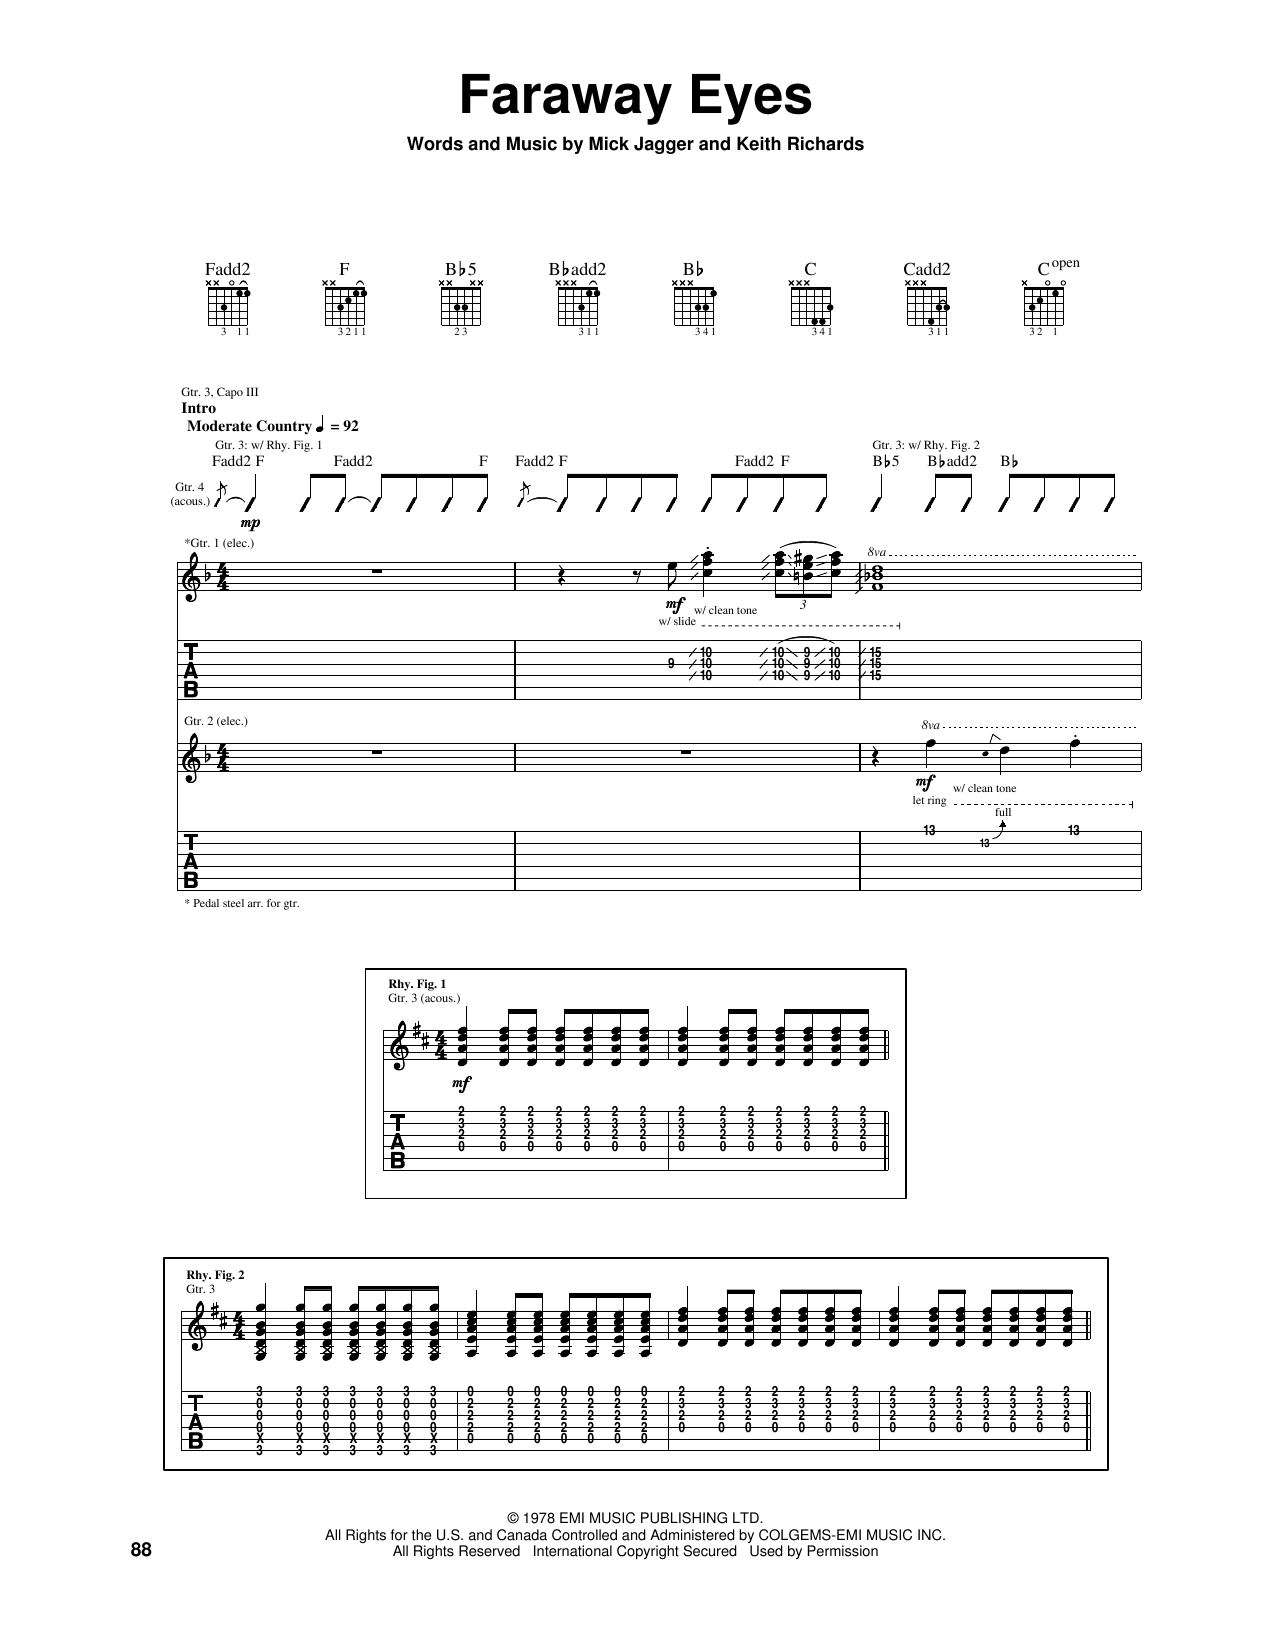 Download The Rolling Stones Faraway Eyes Sheet Music